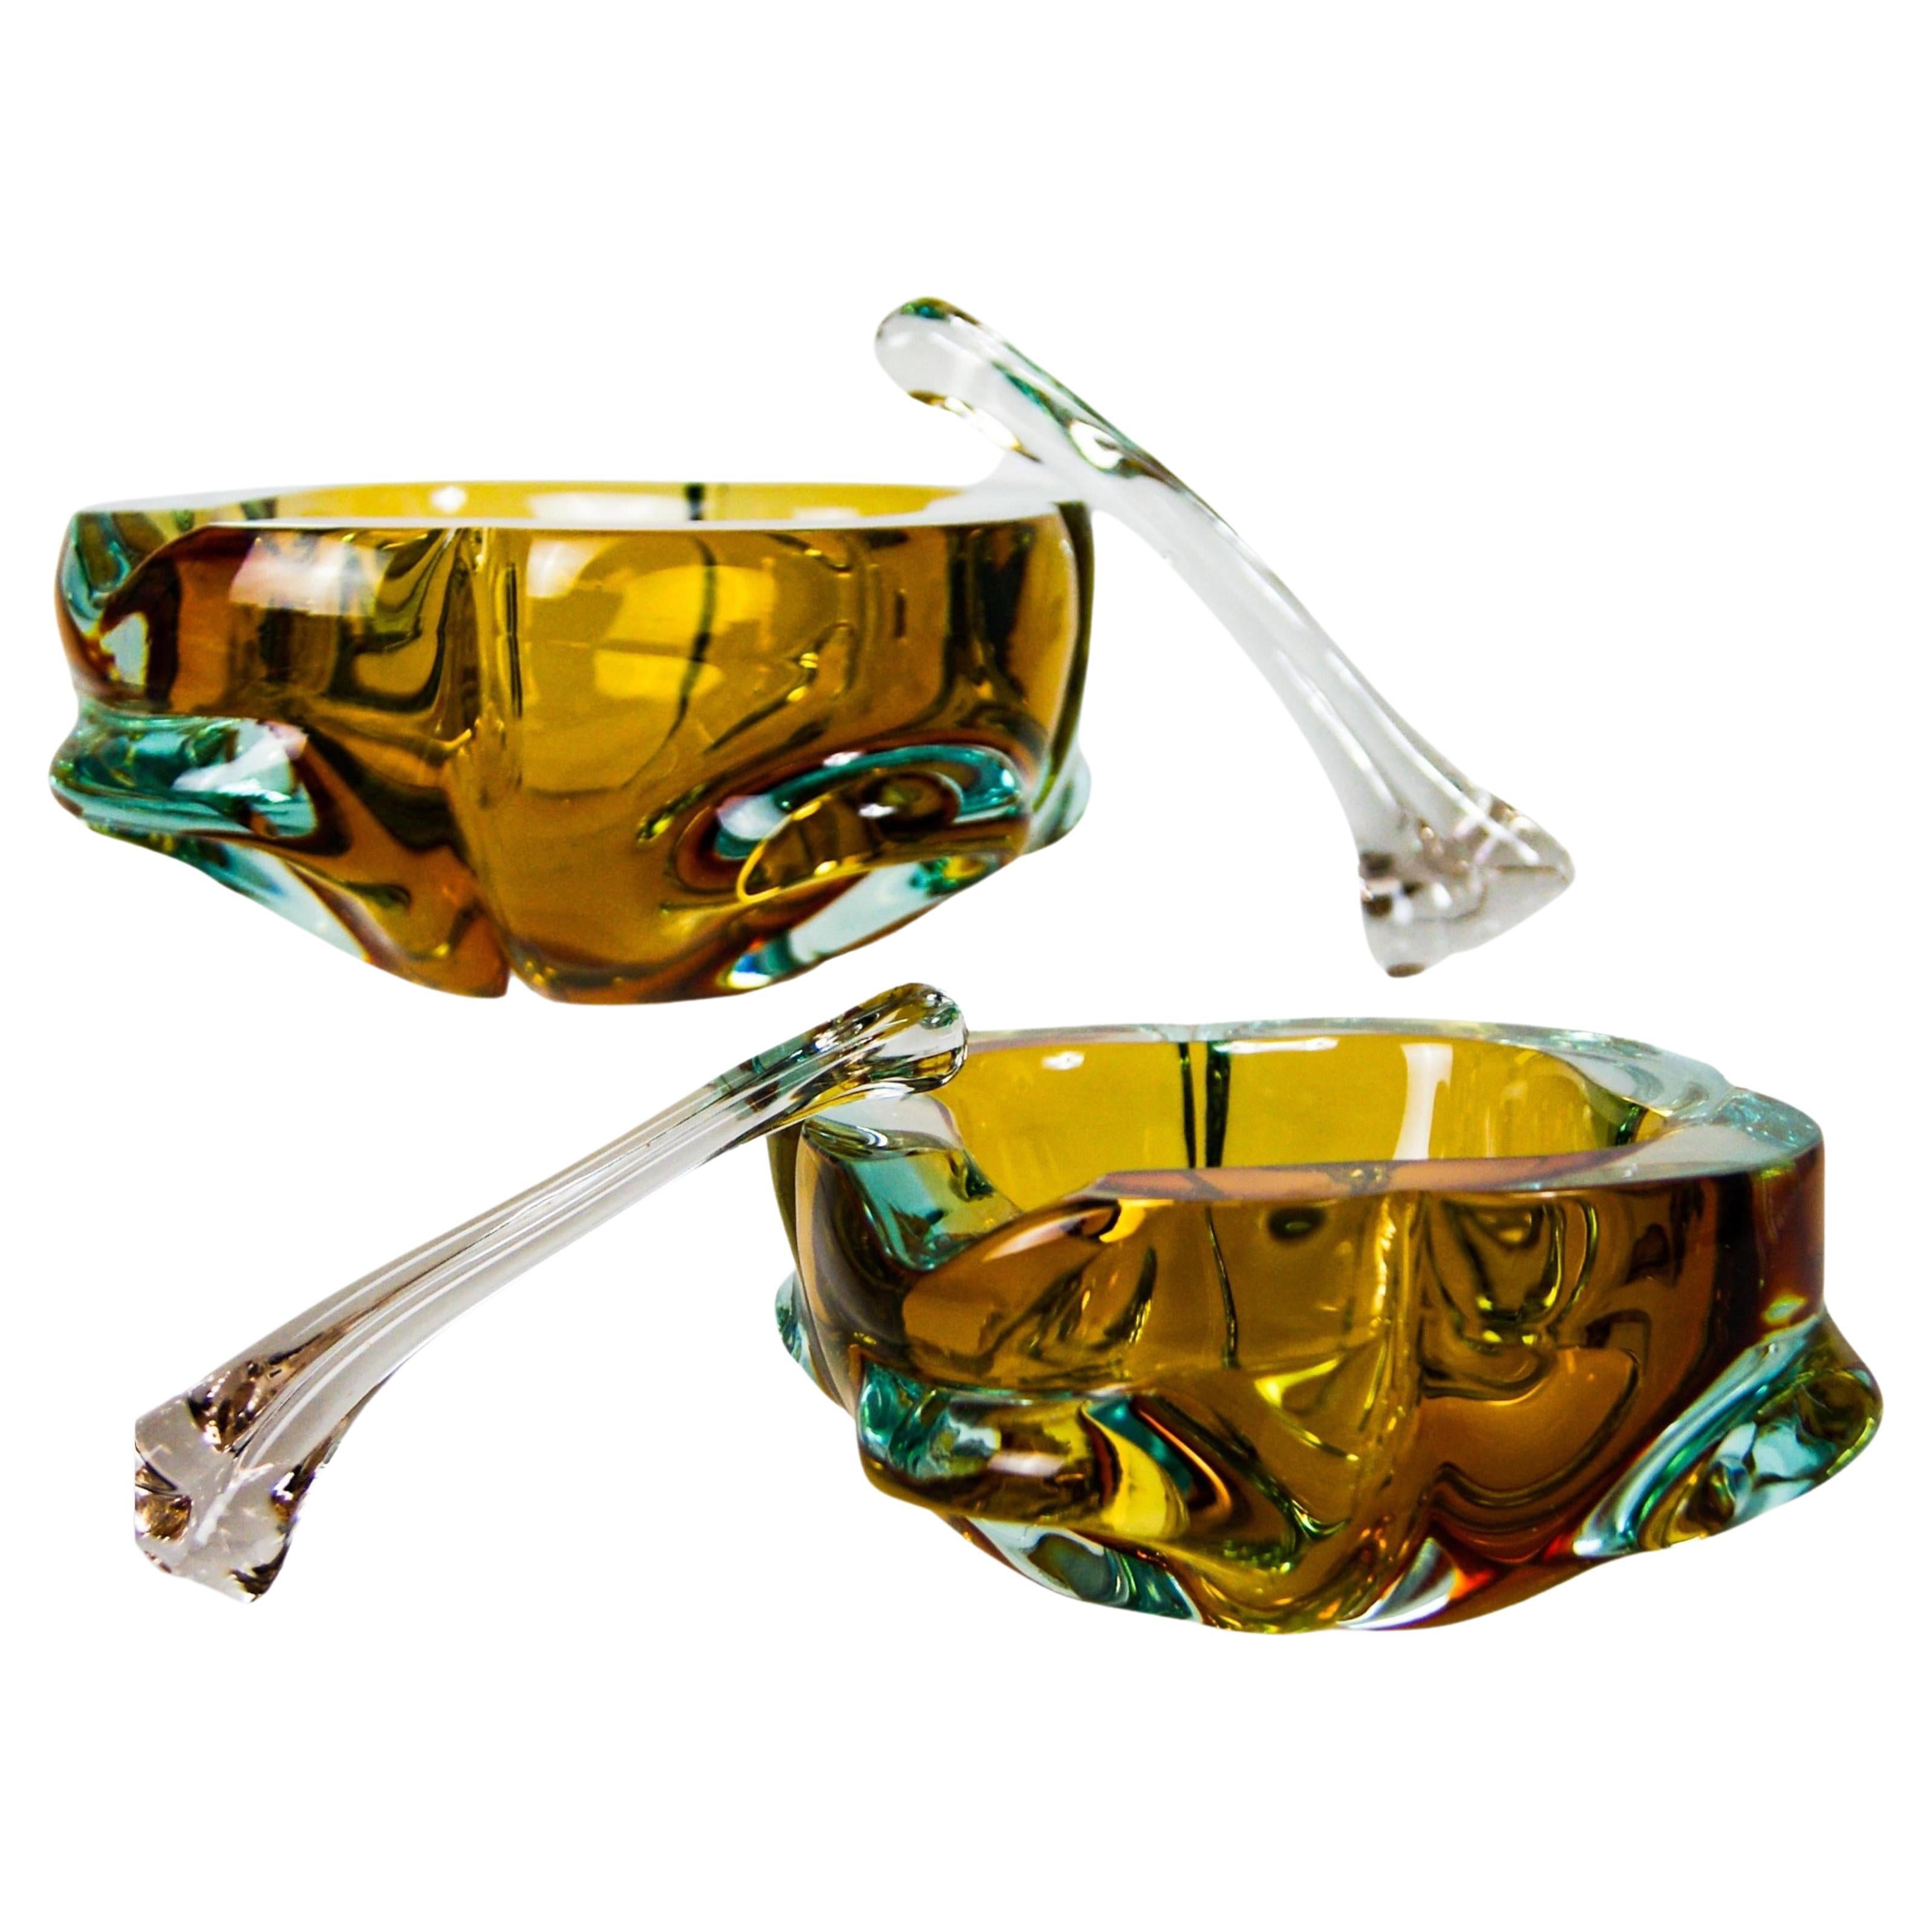 Set of 2 Murano Sommerso Glass Cigar Ashtrays with Stubbers Flavio Poli Attr.